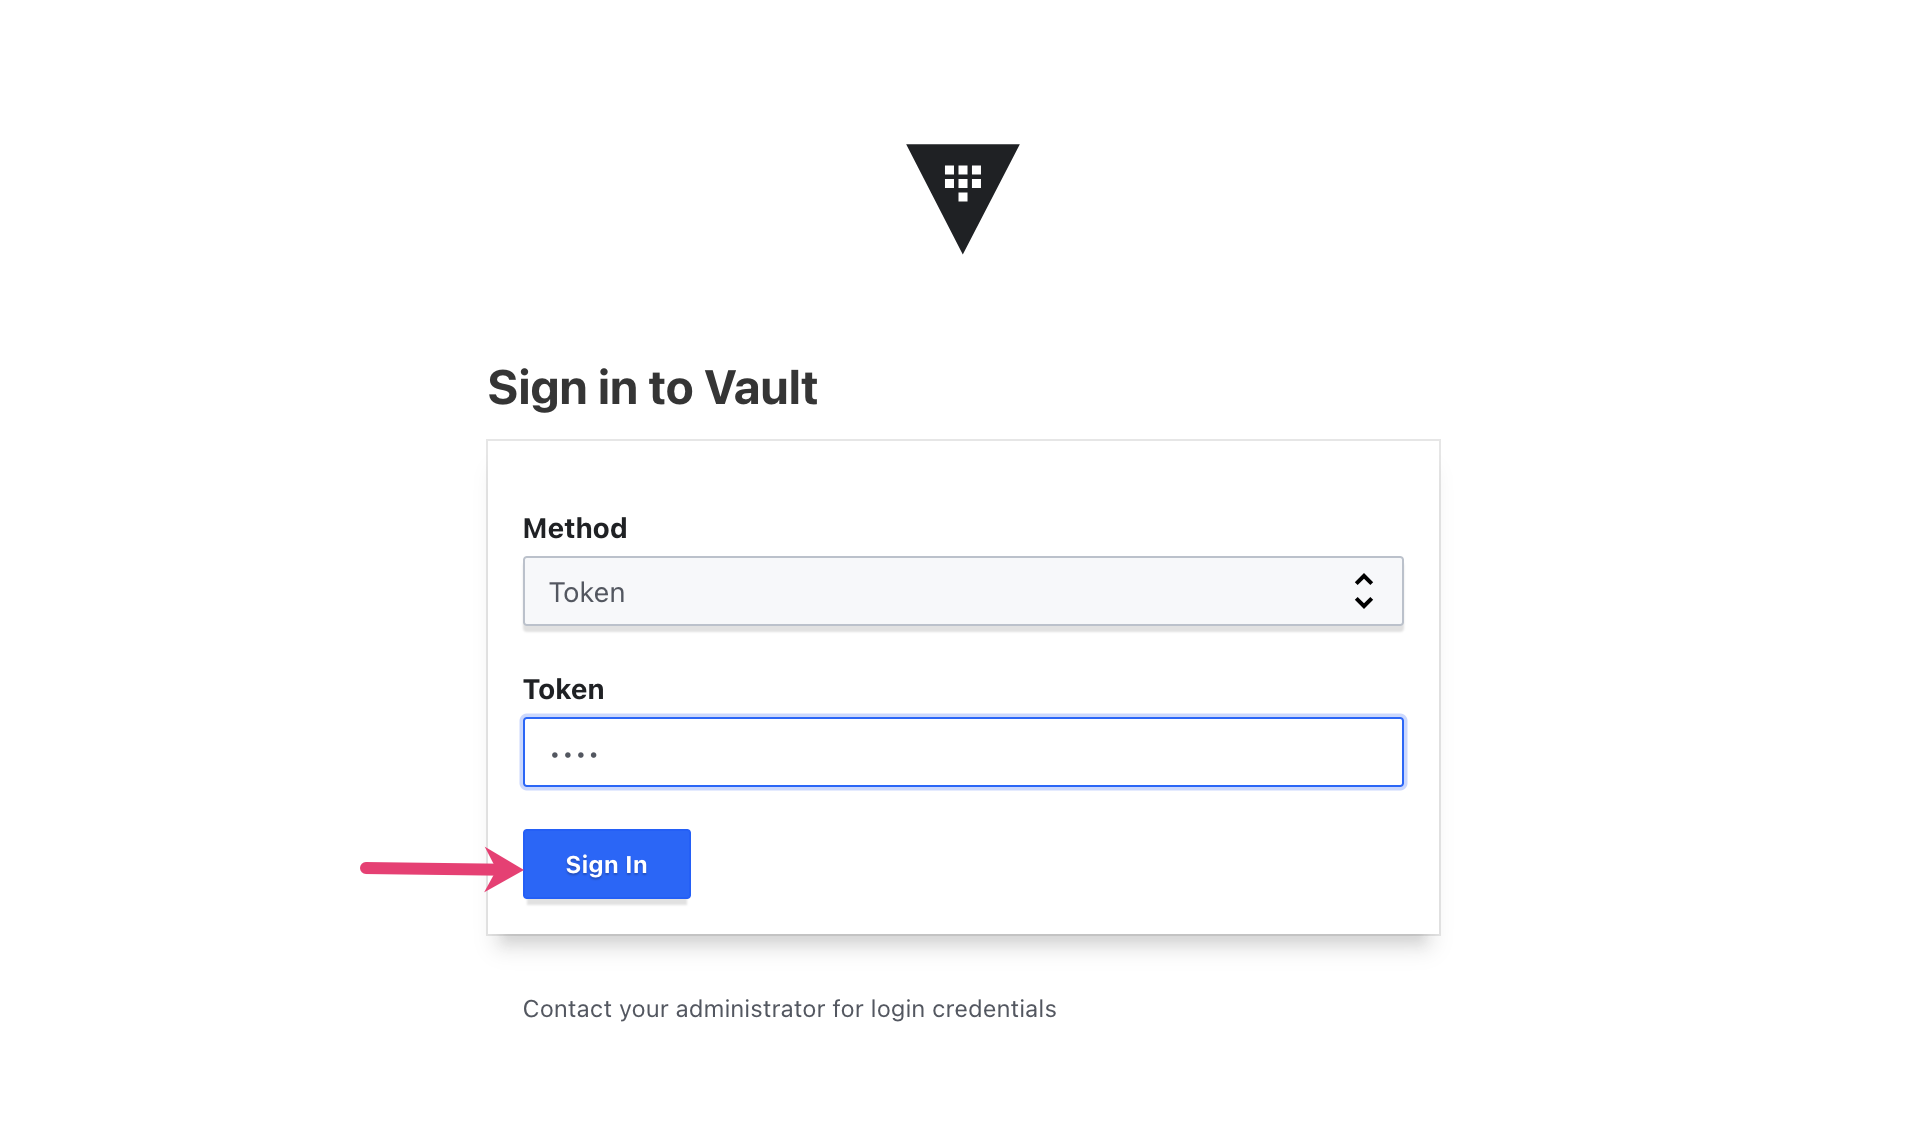 Sign in to Vault